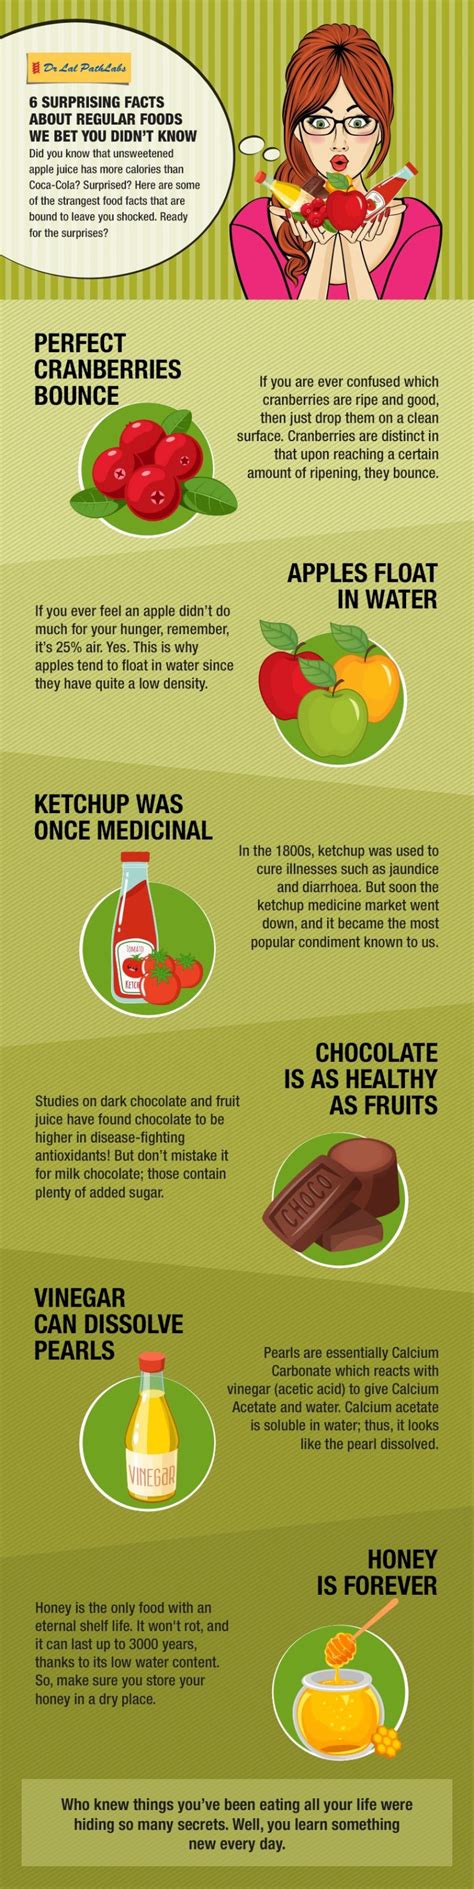 6 Surprising Facts About Regular Foods We Bet You Didnt Know